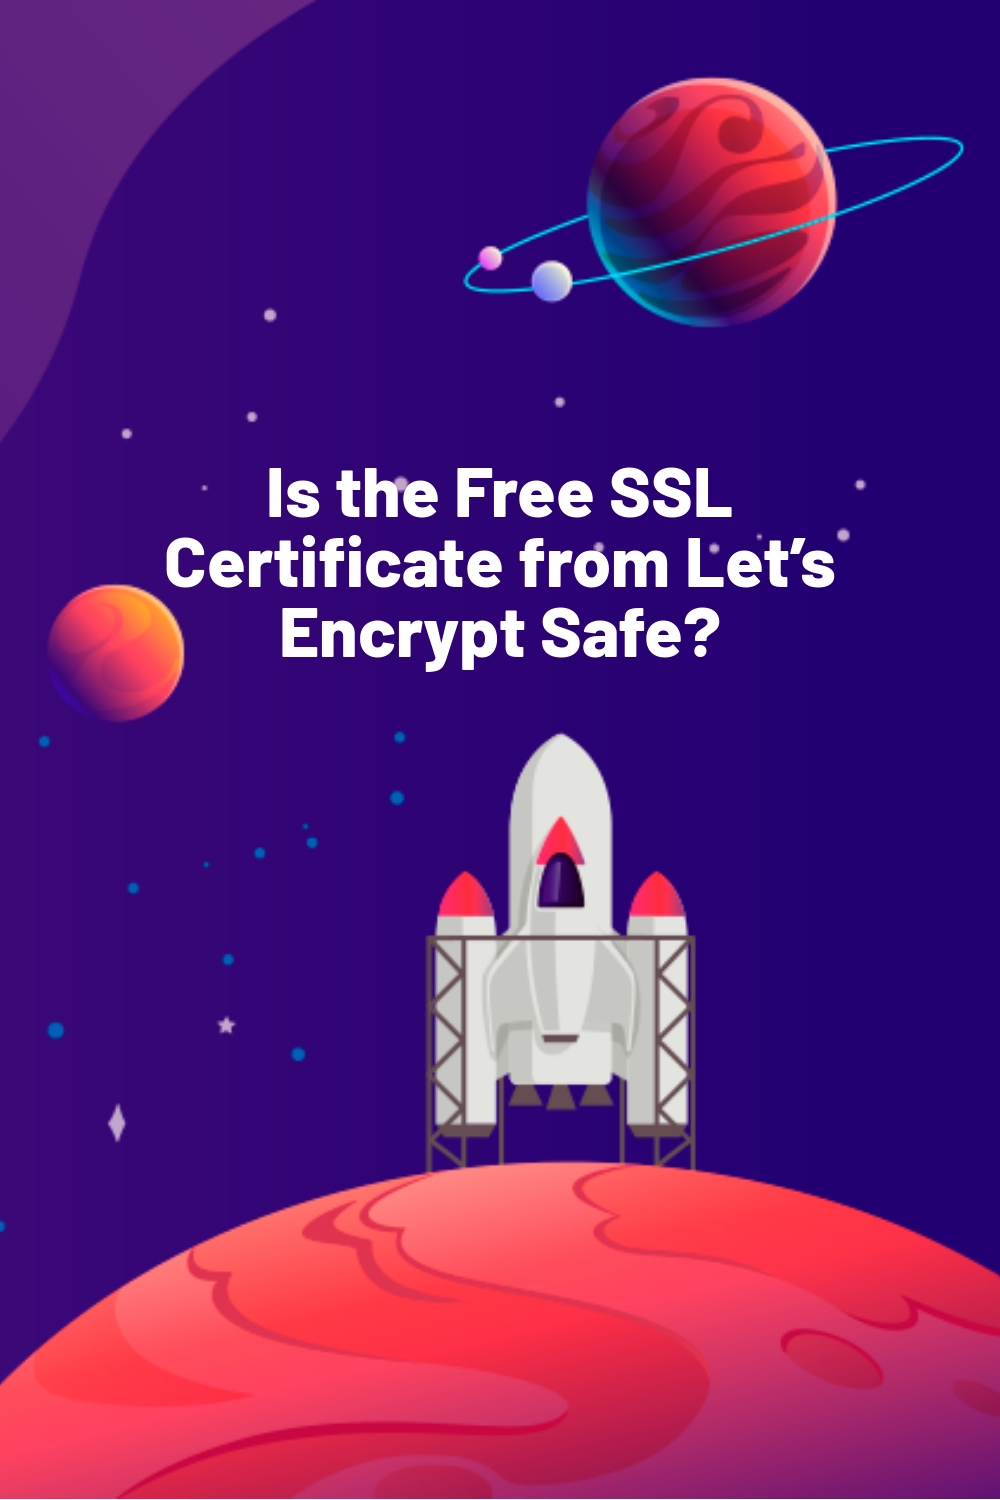 Is the Free SSL Certificate from Let’s Encrypt Safe?